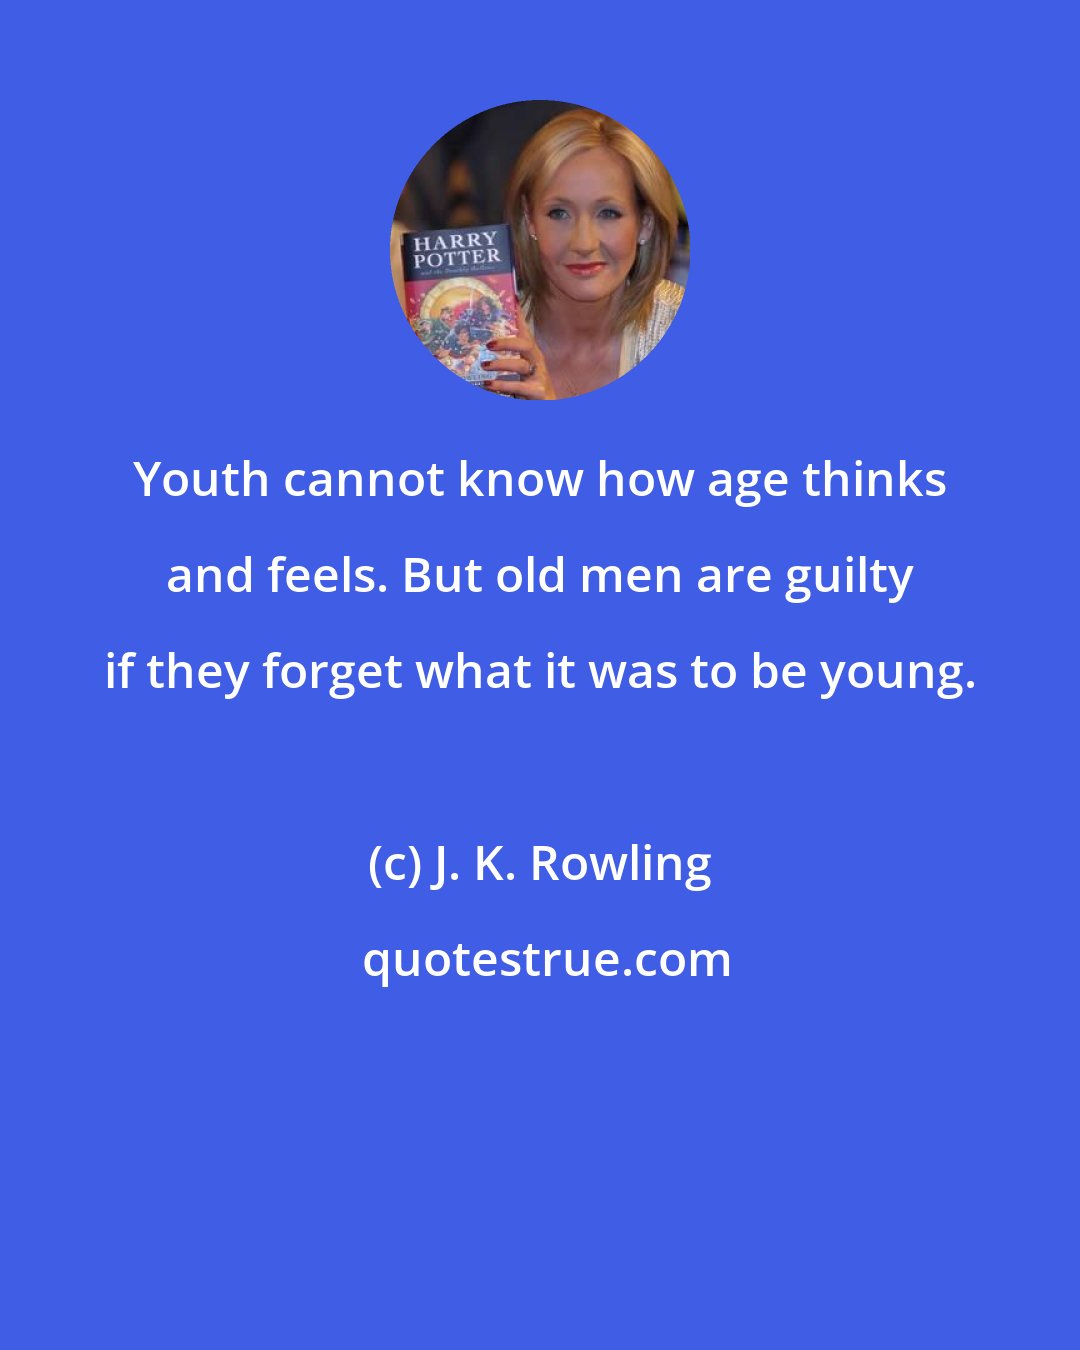 J. K. Rowling: Youth cannot know how age thinks and feels. But old men are guilty if they forget what it was to be young.